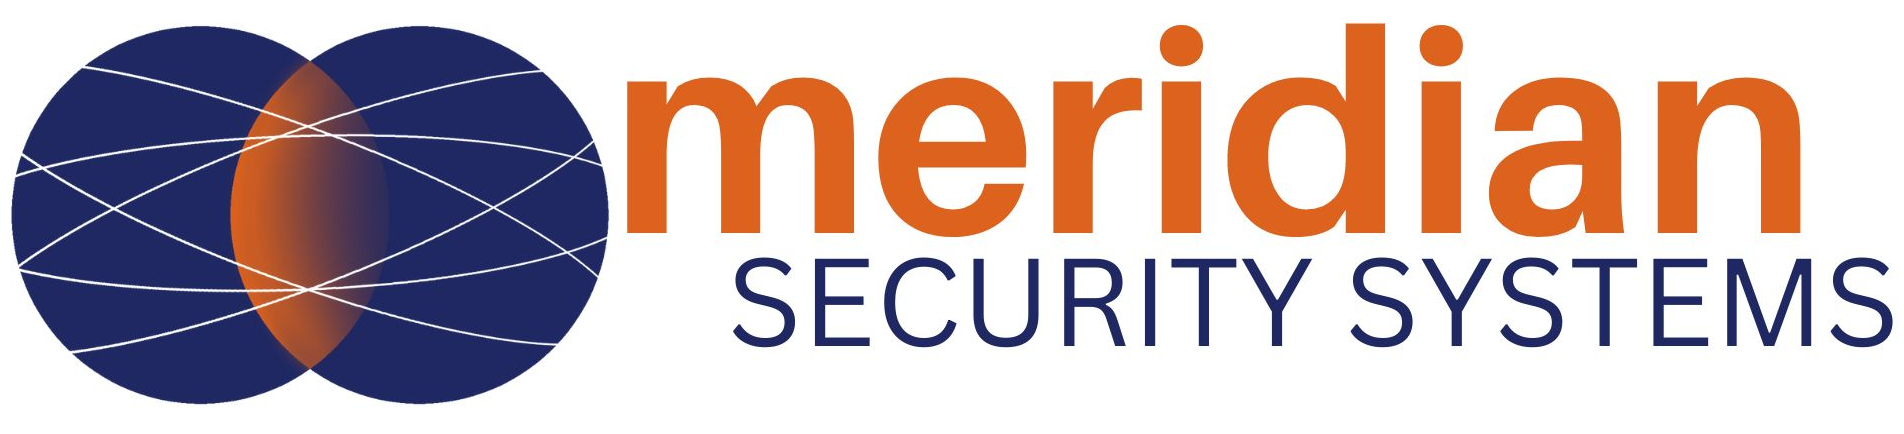 Meridian Security Systems